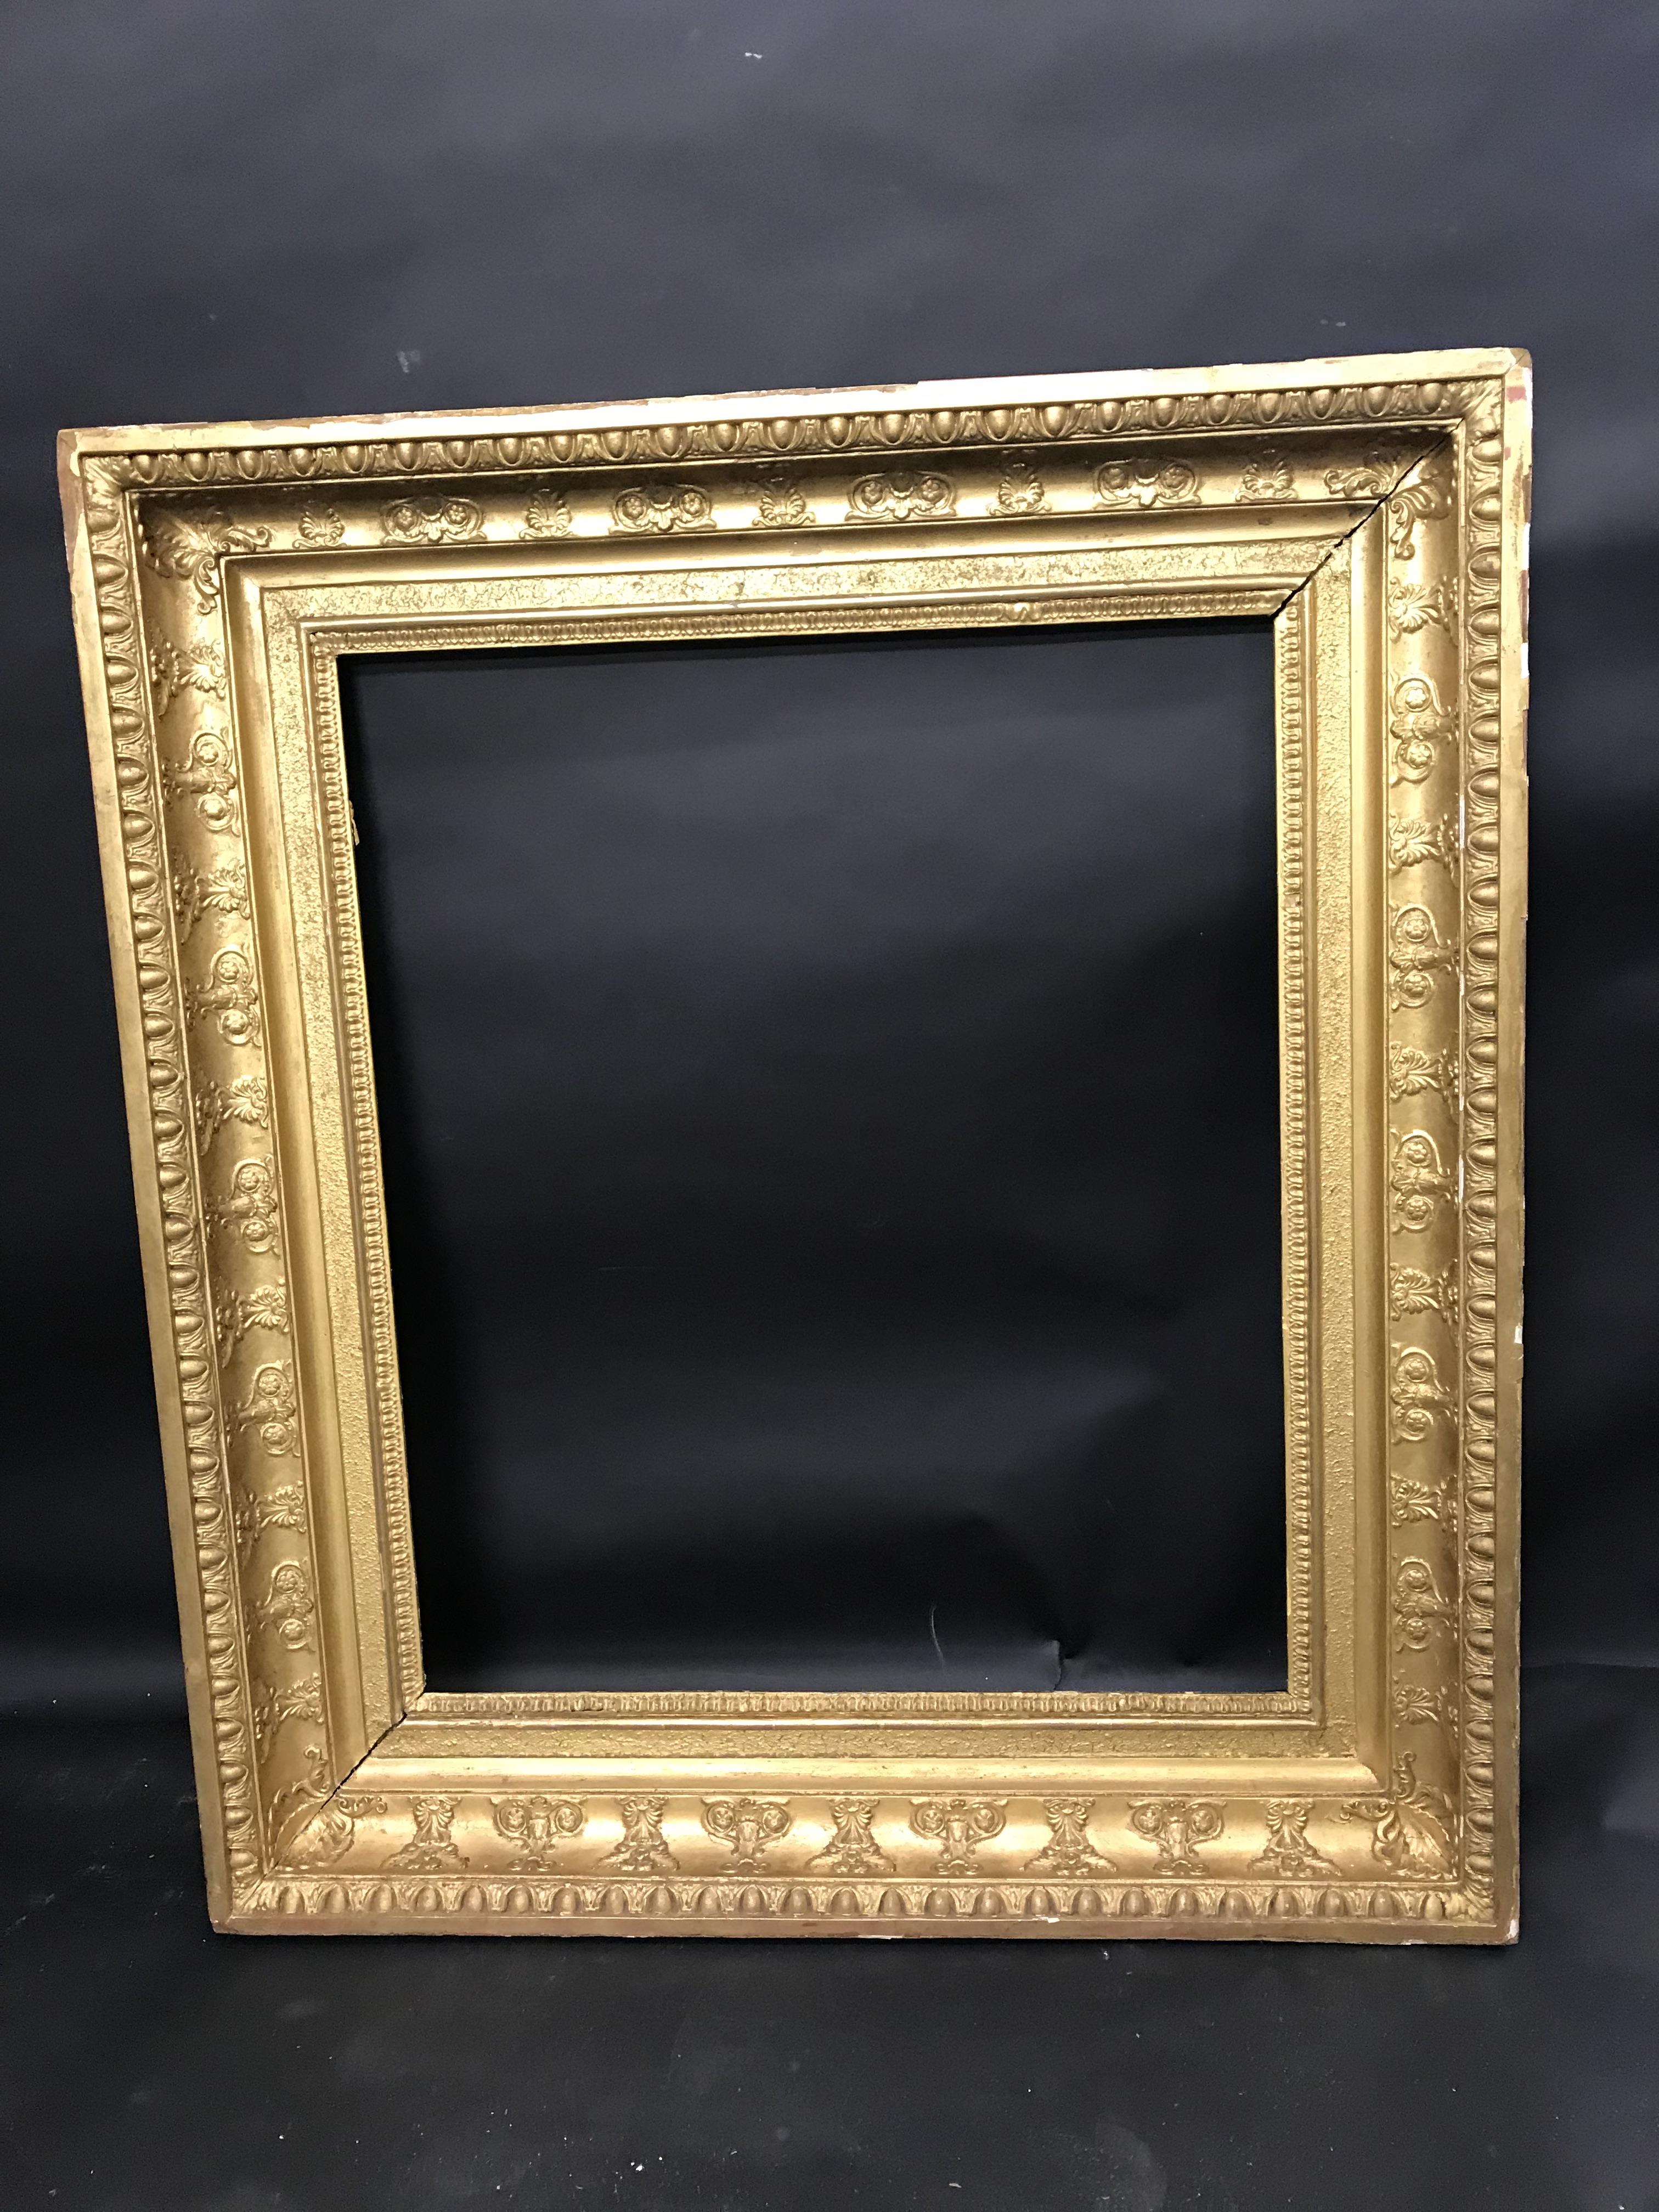 19th Century French School. An Empire Gilt Composition Frame, 26" x 22" (rebate). - Image 2 of 3